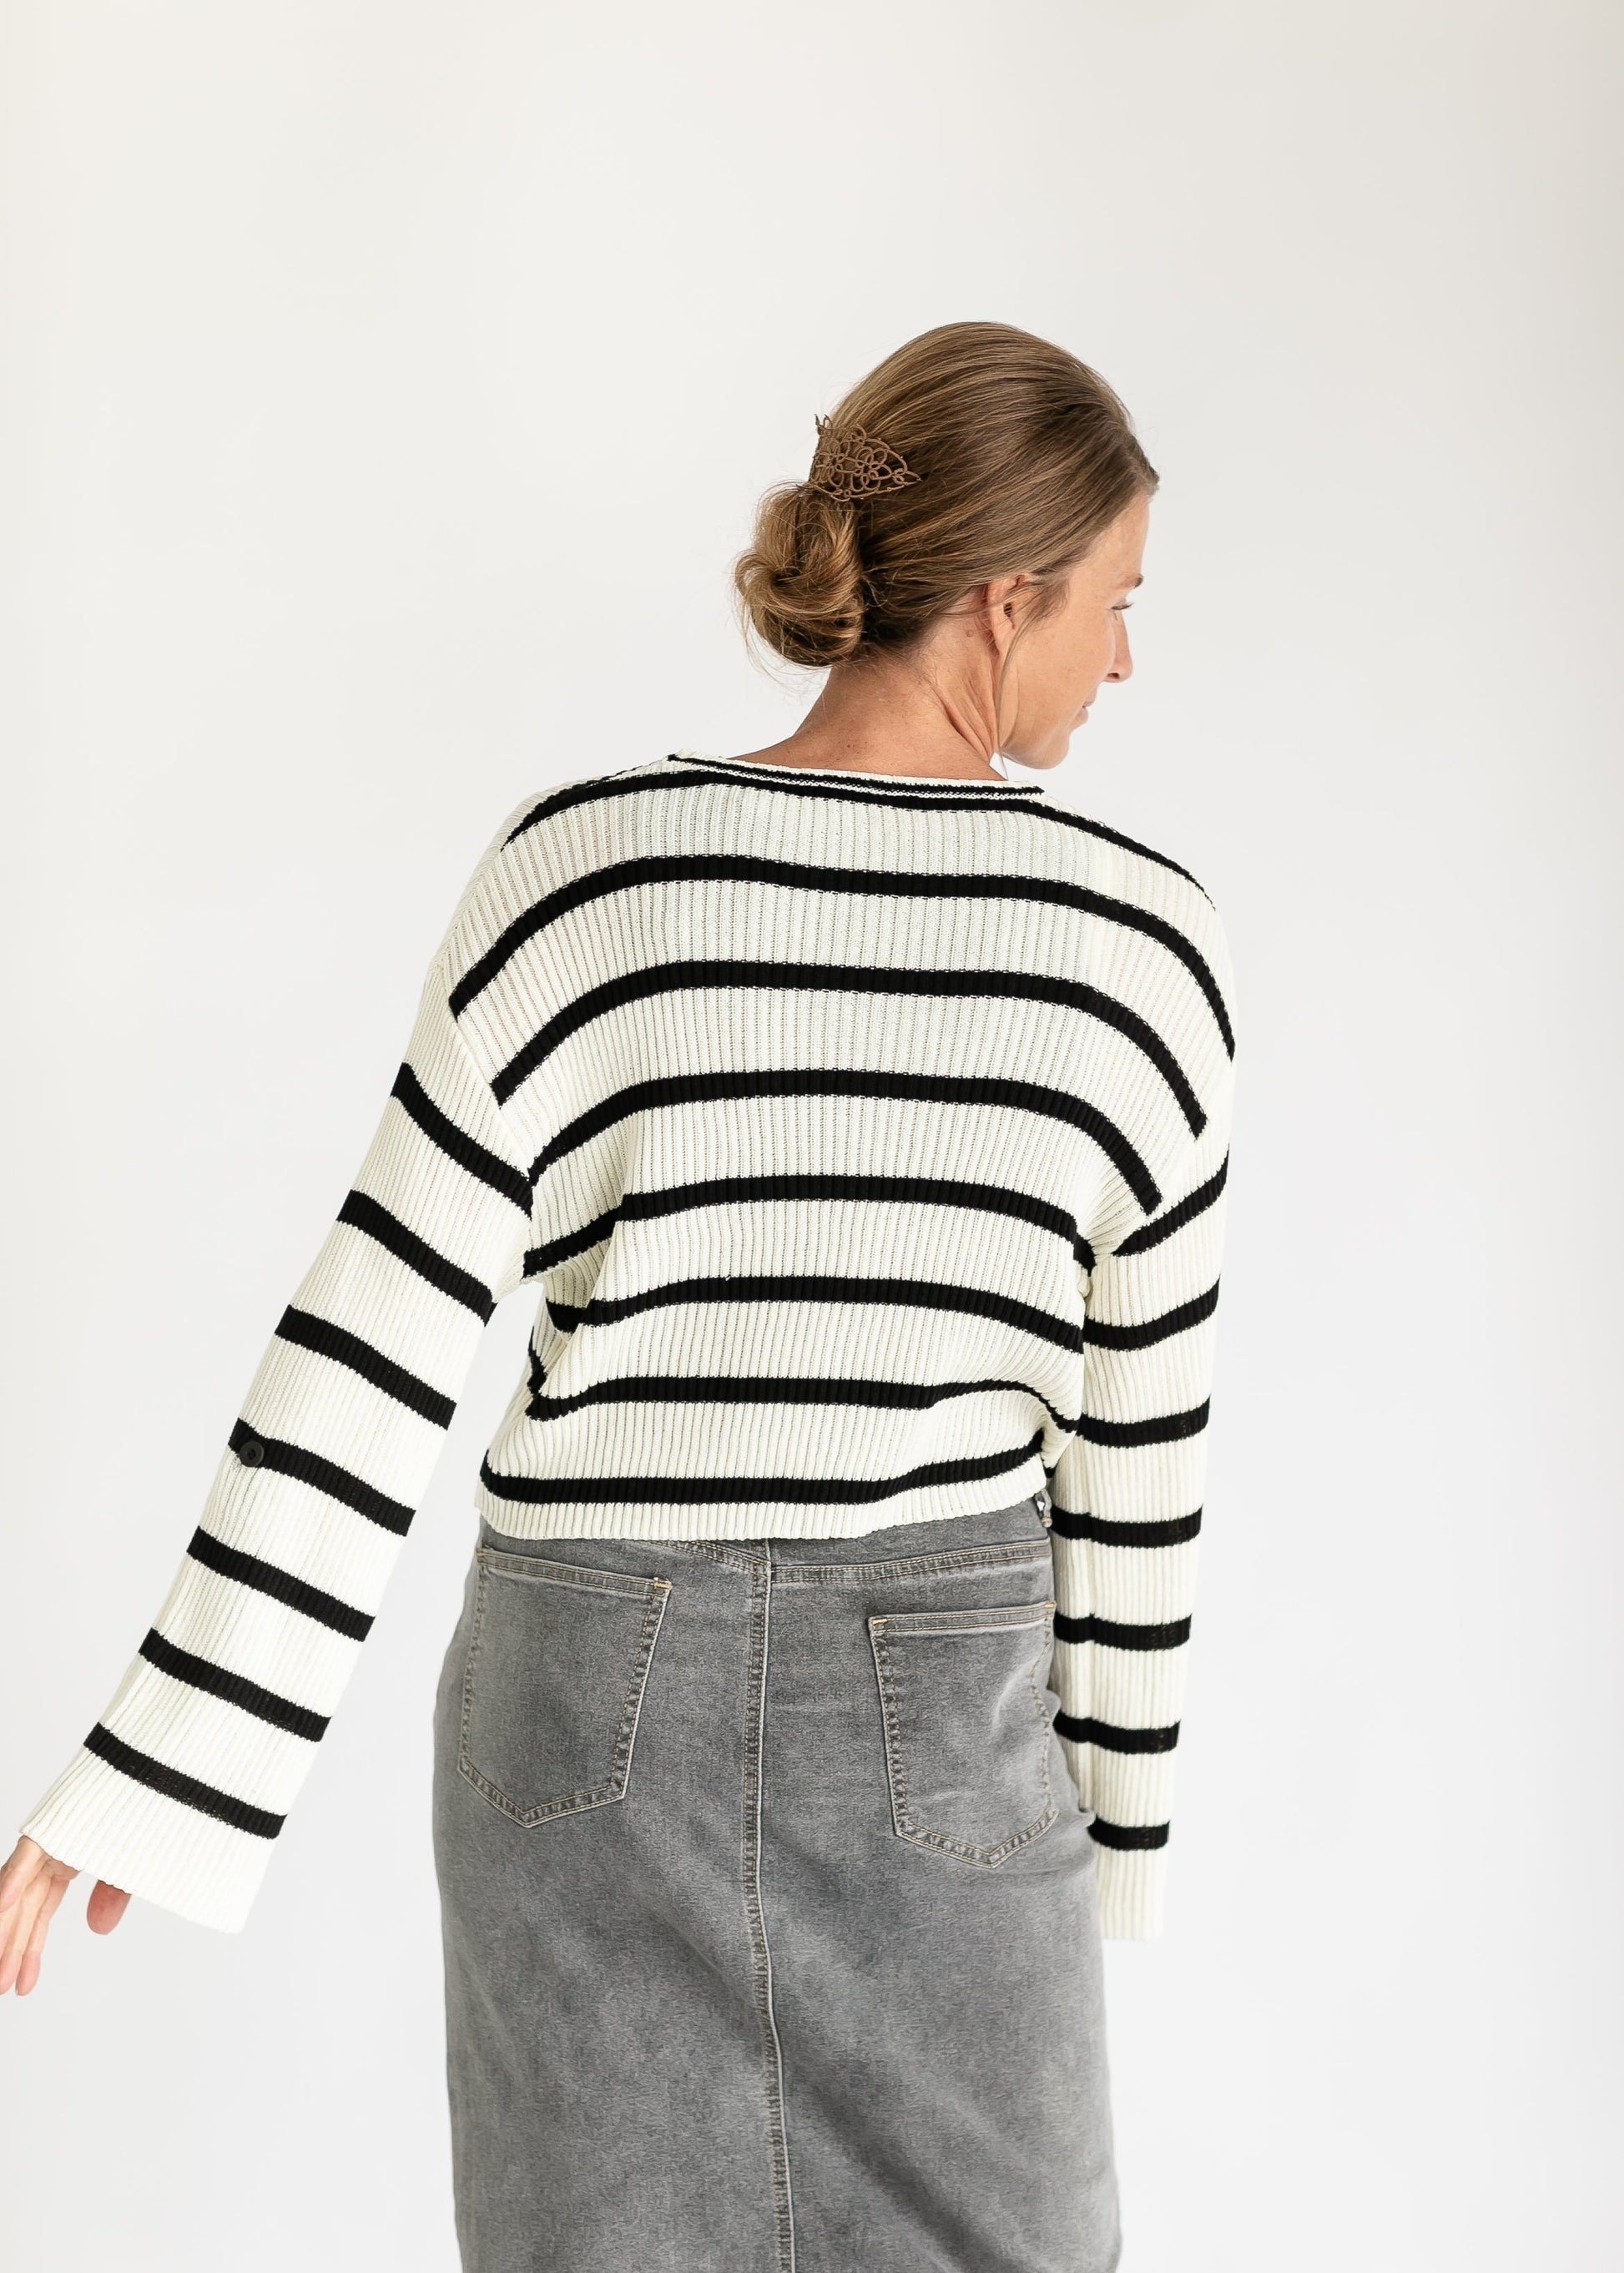 Black Striped Bell Sleeve Knit Top FF Tops